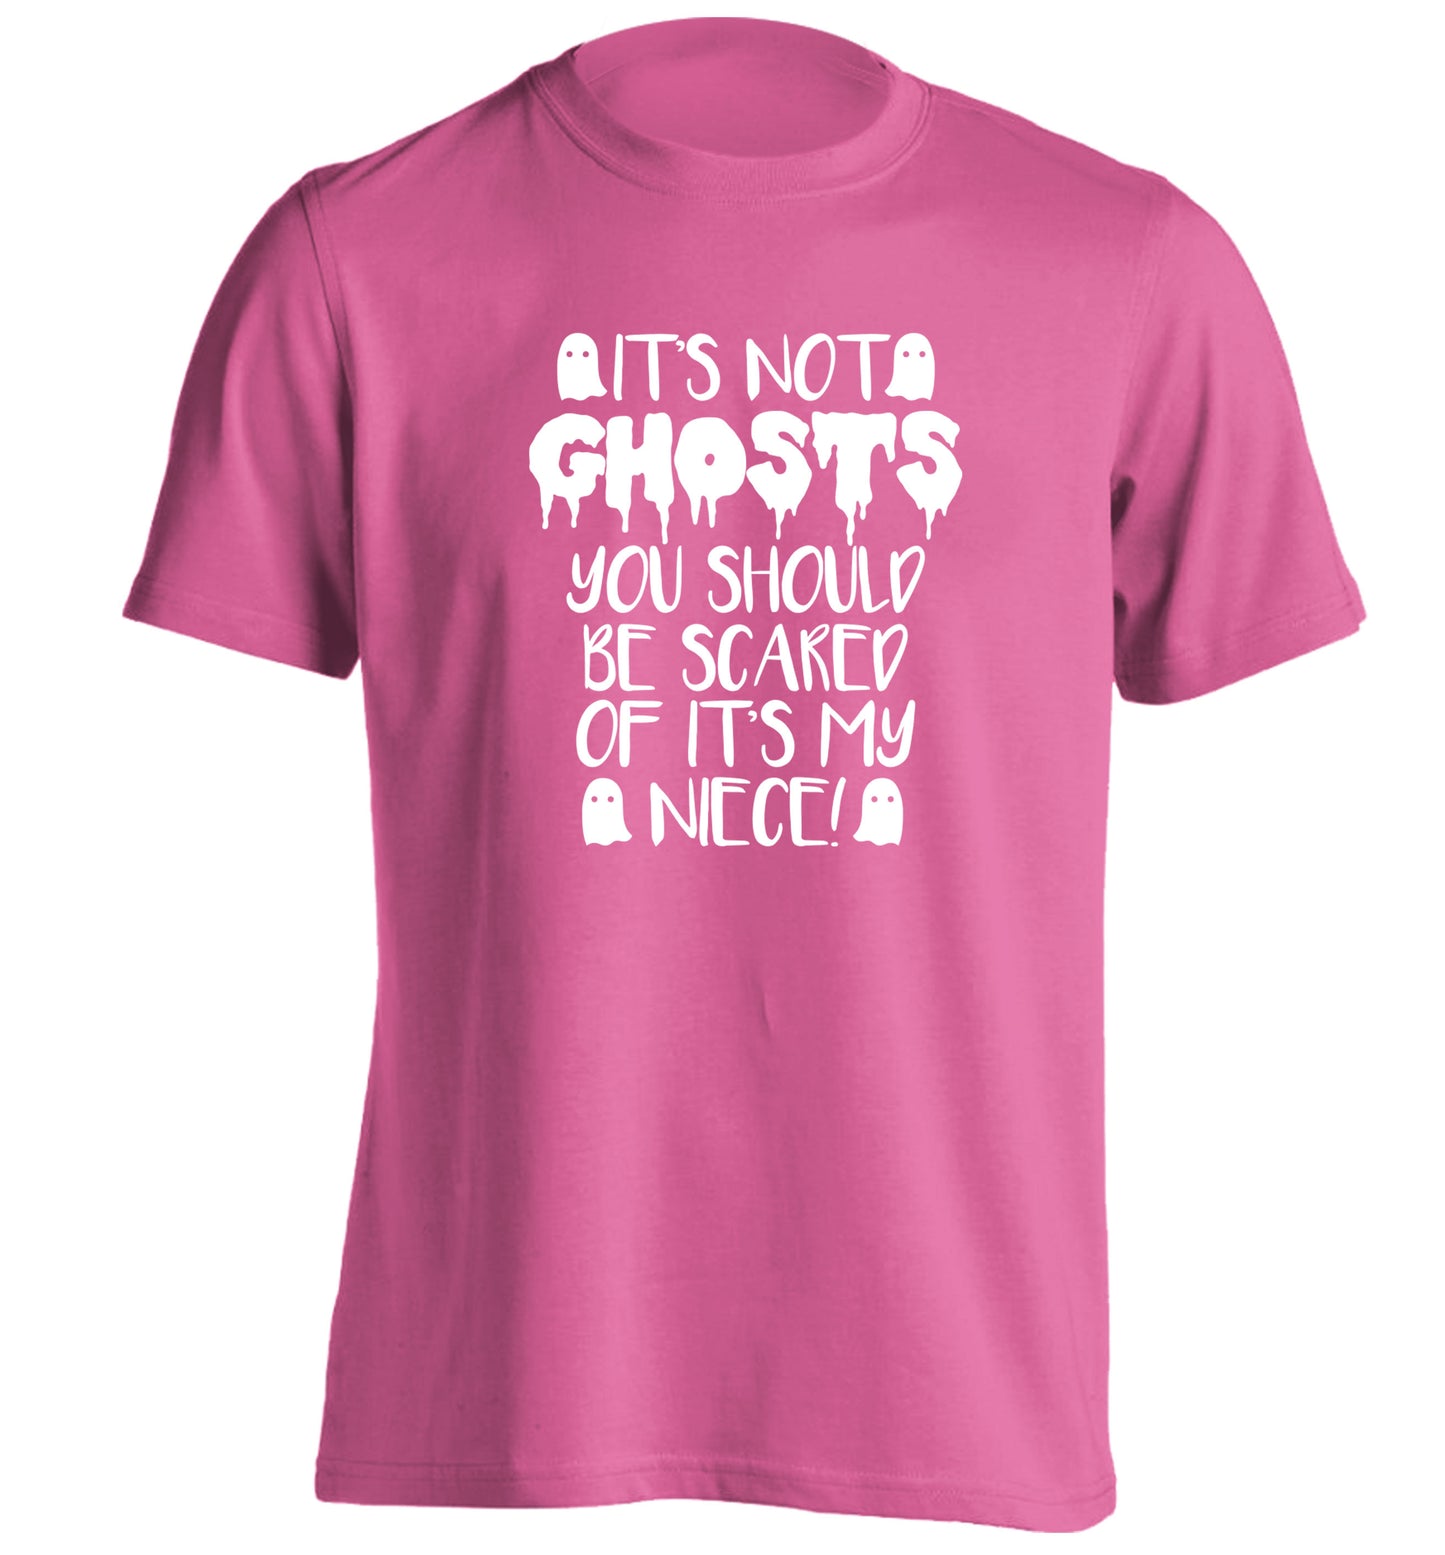 It's not ghosts you should be scared of it's my niece! adults unisex pink Tshirt 2XL